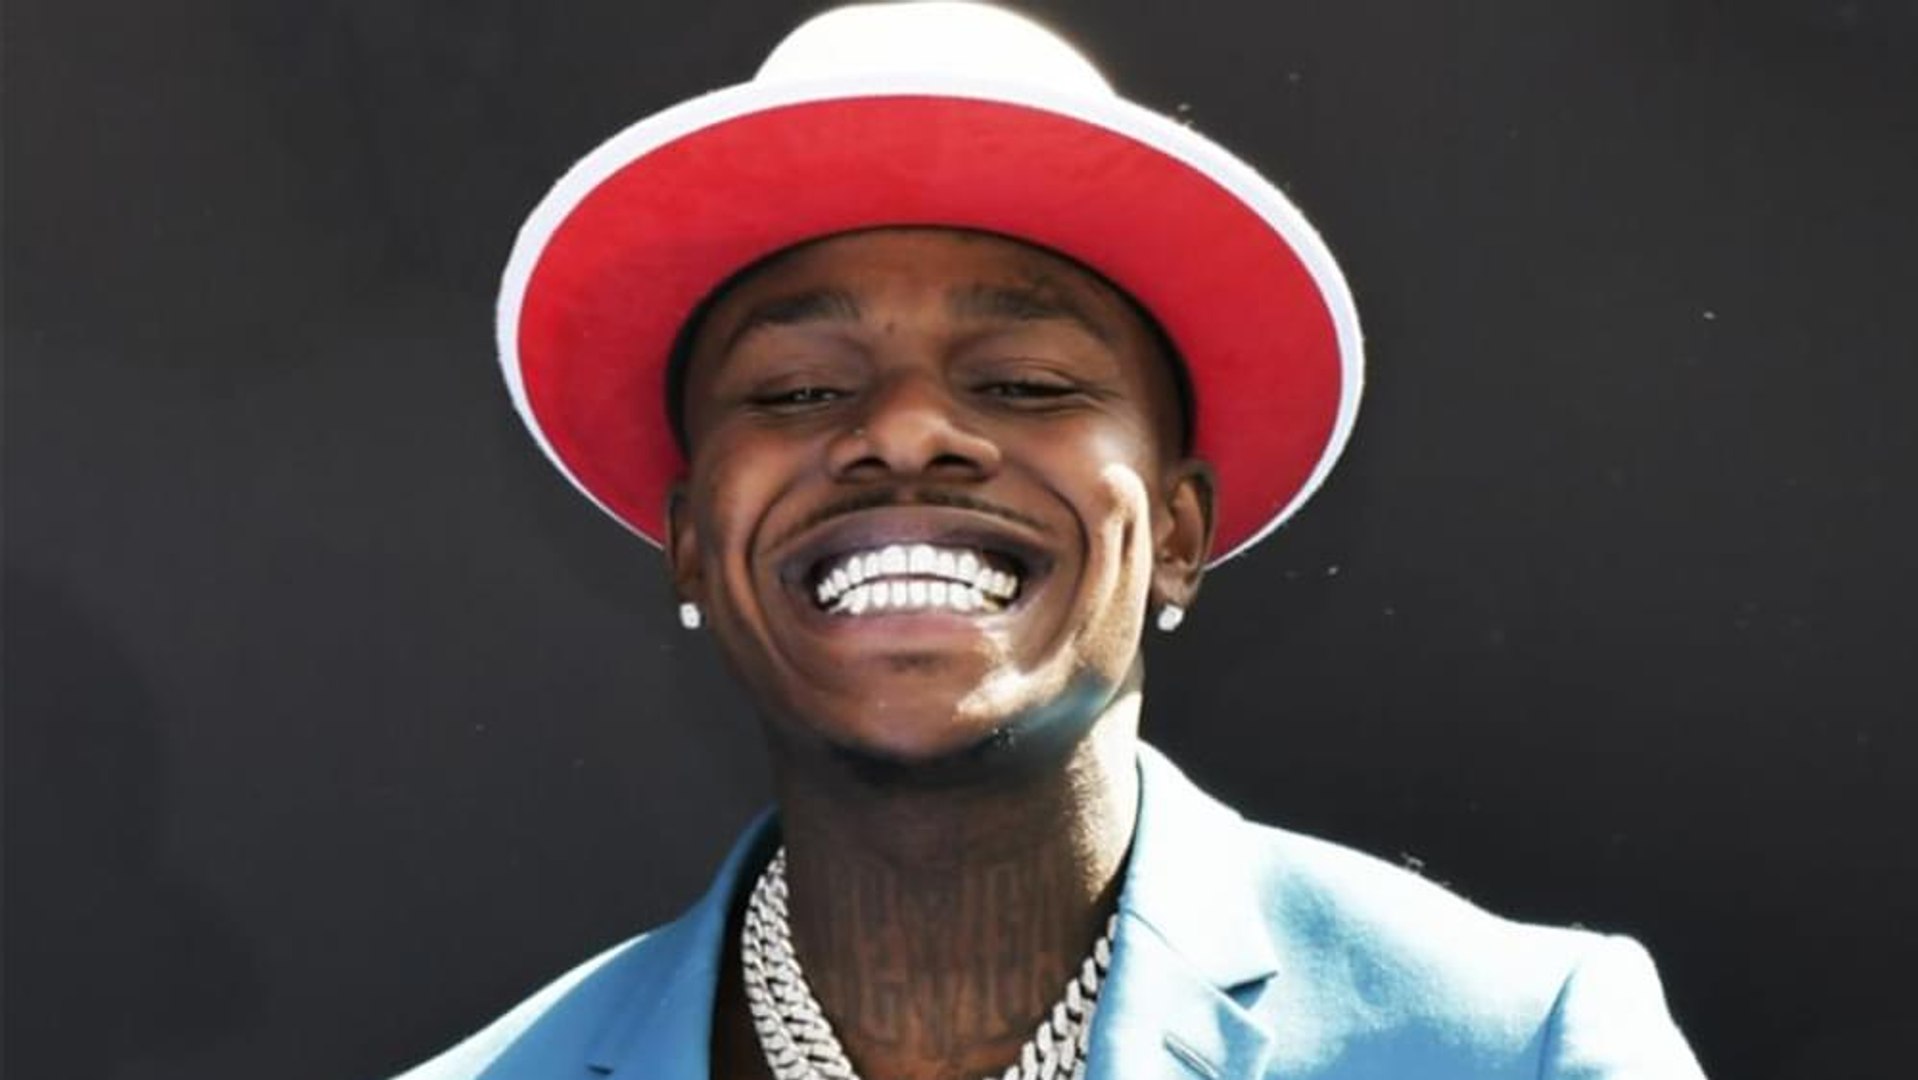 DaBaby Tackles The Rumors On “Shut Up